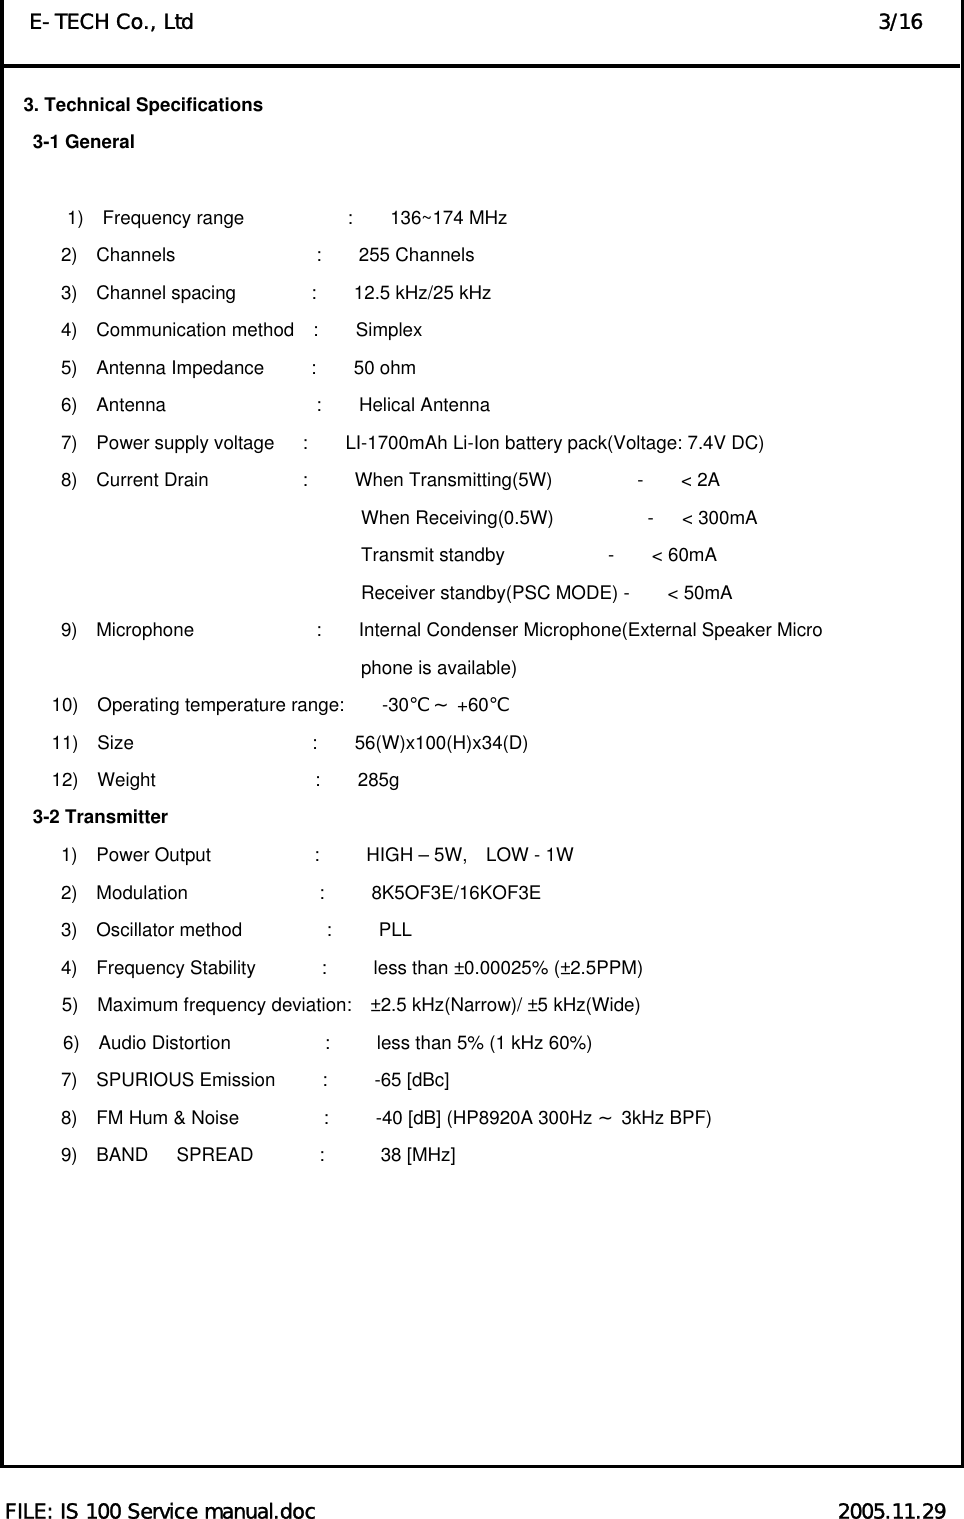  FILE: IS 100 Service manual.doc                                                   2005.11.29 E-TECH Co., Ltd                                                                   3/16 3. Technical Specifications    3-1 General          1)  Frequency range           :    136~174 MHz 2)  Channels               :    255 Channels 3)  Channel spacing        :    12.5 kHz/25 kHz 4)  Communication method  :    Simplex 5)  Antenna Impedance     :    50 ohm  6)  Antenna                :    Helical Antenna 7)  Power supply voltage   :    LI-1700mAh Li-Ion battery pack(Voltage: 7.4V DC) 8)  Current Drain          :     When Transmitting(5W)         -    &lt; 2A                                       When Receiving(0.5W)          -   &lt; 300mA                                       Transmit standby           -    &lt; 60mA                                       Receiver standby(PSC MODE) -    &lt; 50mA 9)  Microphone             :    Internal Condenser Microphone(External Speaker Micro                                 phone is available)       10)  Operating temperature range:    -30    +℃～ 60℃      11)  Size                   :    56(W)x100(H)x34(D)      12)  Weight                 :    285g    3-2 Transmitter       1)  Power Output           :     HIGH – 5W,  LOW - 1W       2)  Modulation              :     8K5OF3E/16KOF3E       3)  Oscillator method         :     PLL       4)  Frequency Stability       :     less than ±0.00025% (±2.5PPM) 5)  Maximum frequency deviation:  ±2.5 kHz(Narrow)/ ±5 kHz(Wide) 6)  Audio Distortion          :     less than 5% (1 kHz 60%)       7)  SPURIOUS Emission     :     -65 [dBc]       8)  FM Hum &amp; Noise         :     -40 [dB] (HP8920A 300Hz   3kHz BP～F)        9)  BAND   SPREAD       :      38 [MHz]         